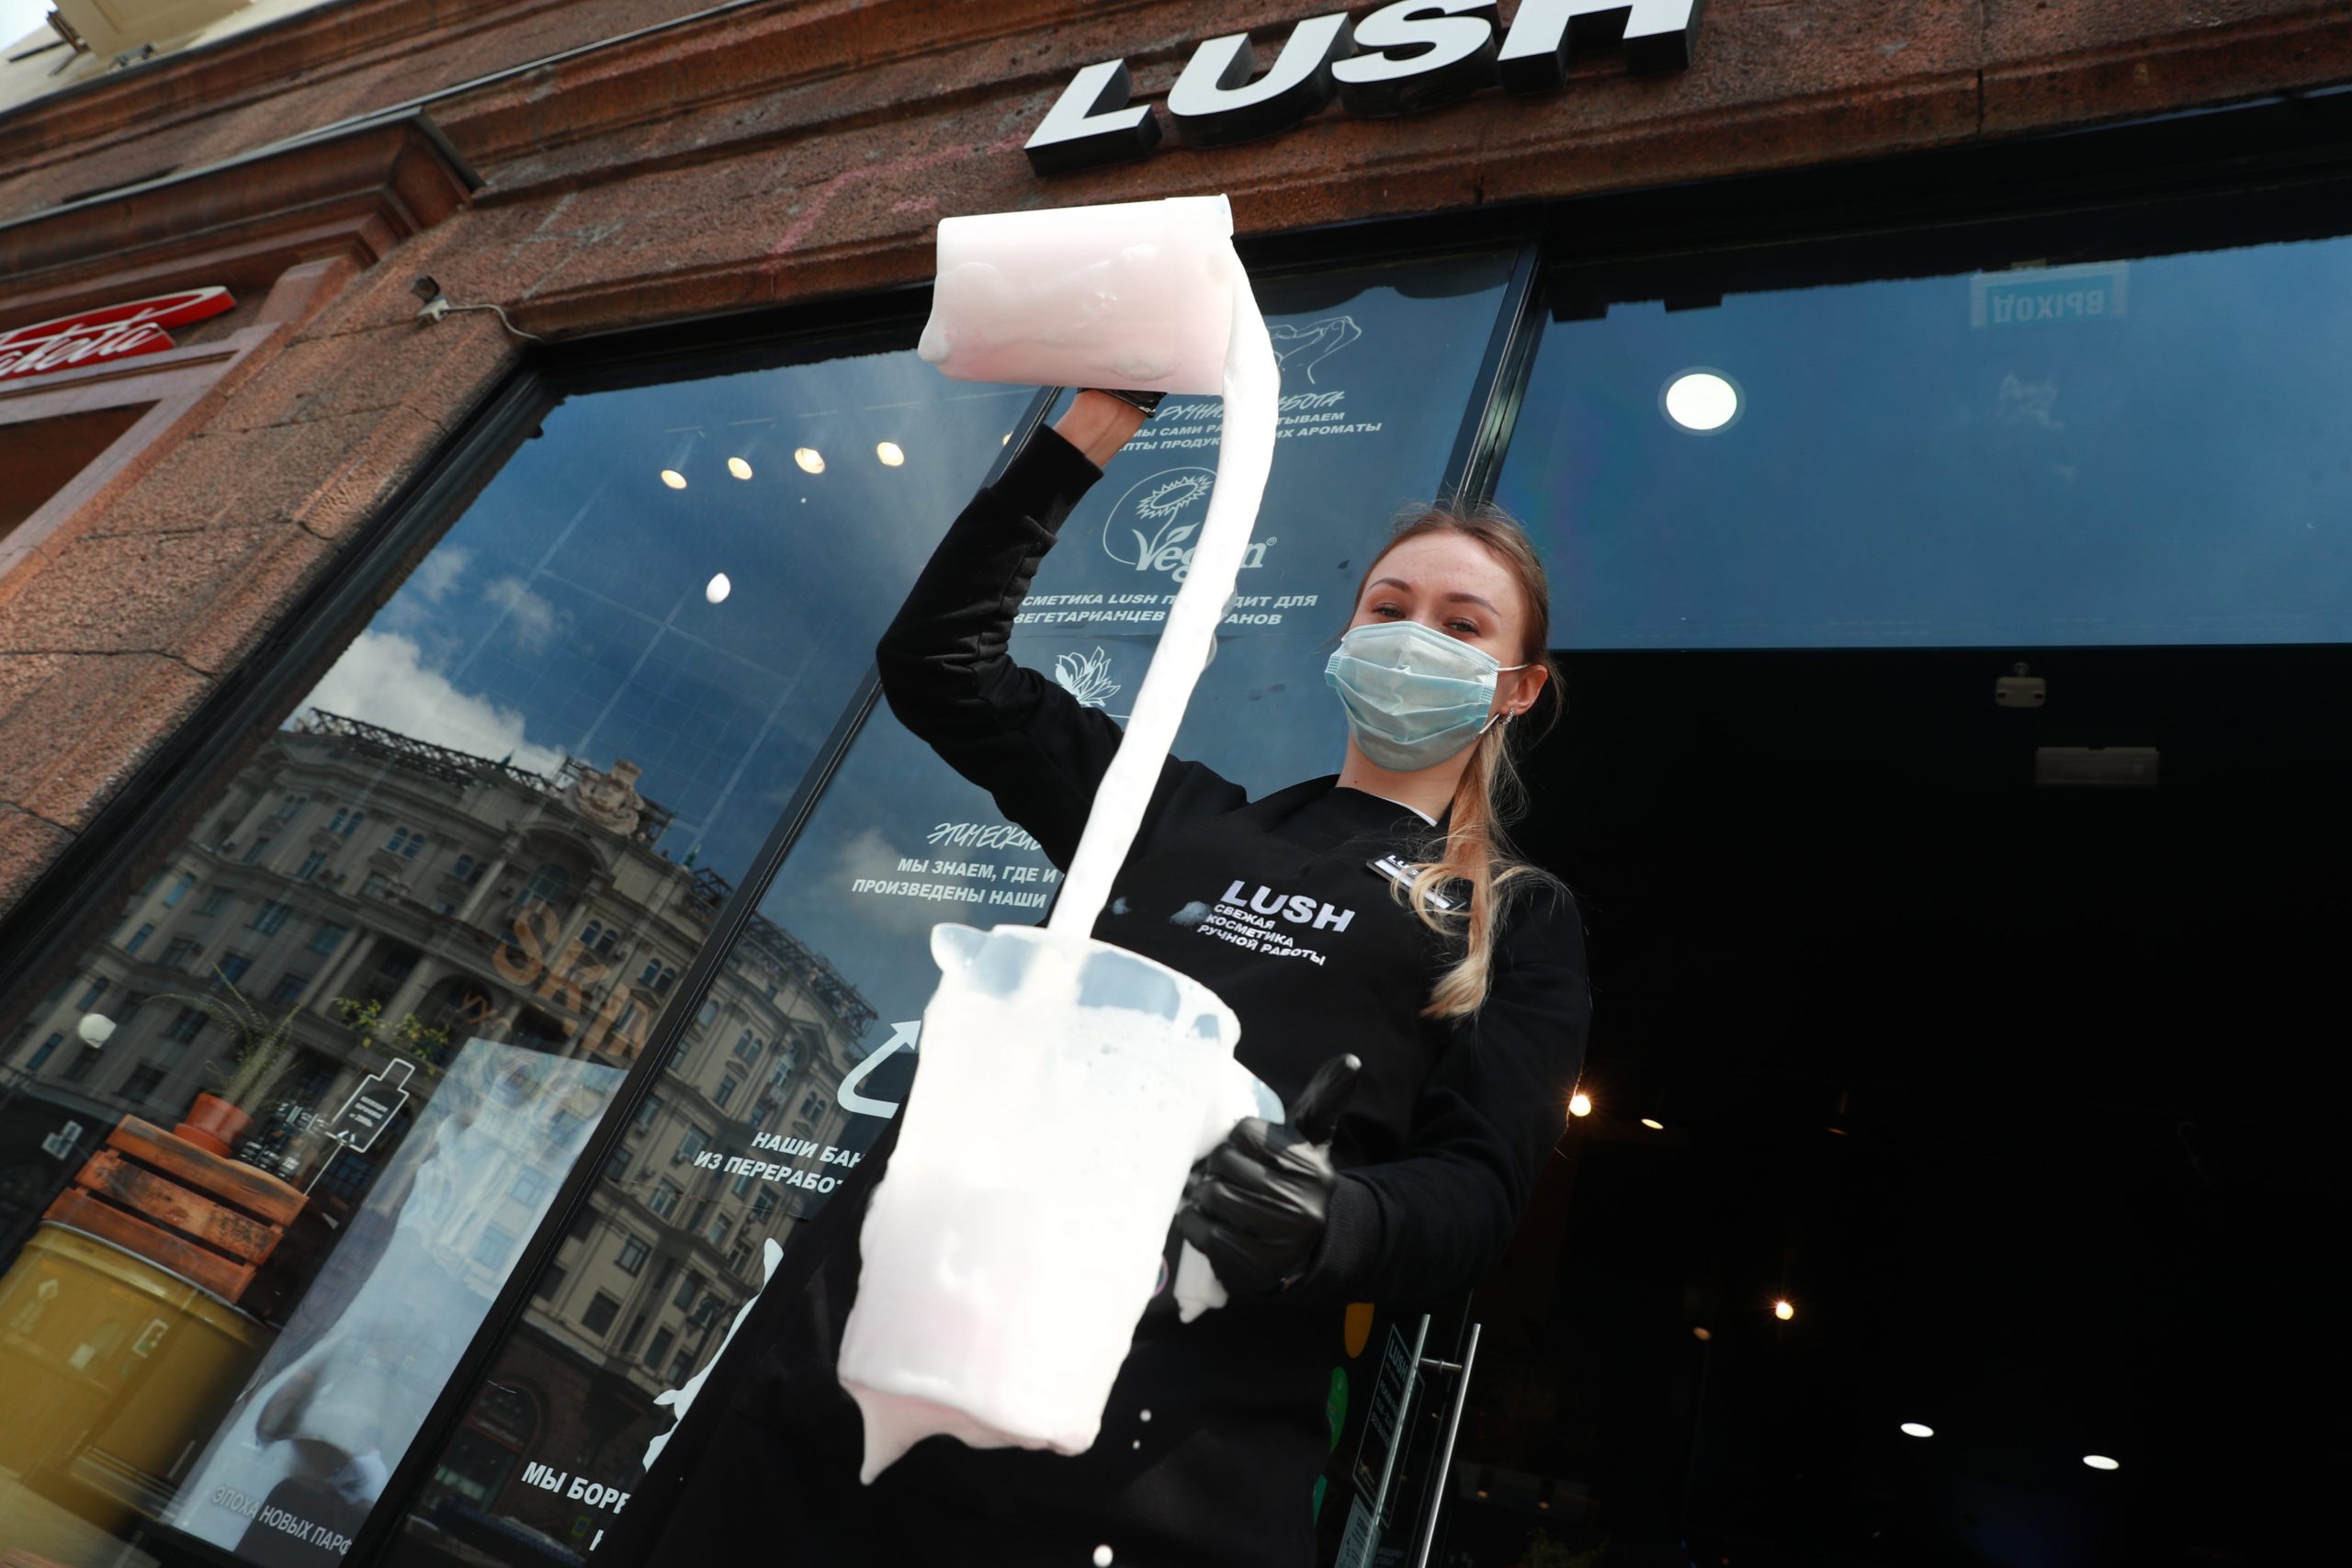 A woman mixing cosmetics outside a Lush store in Moscow, Russia.